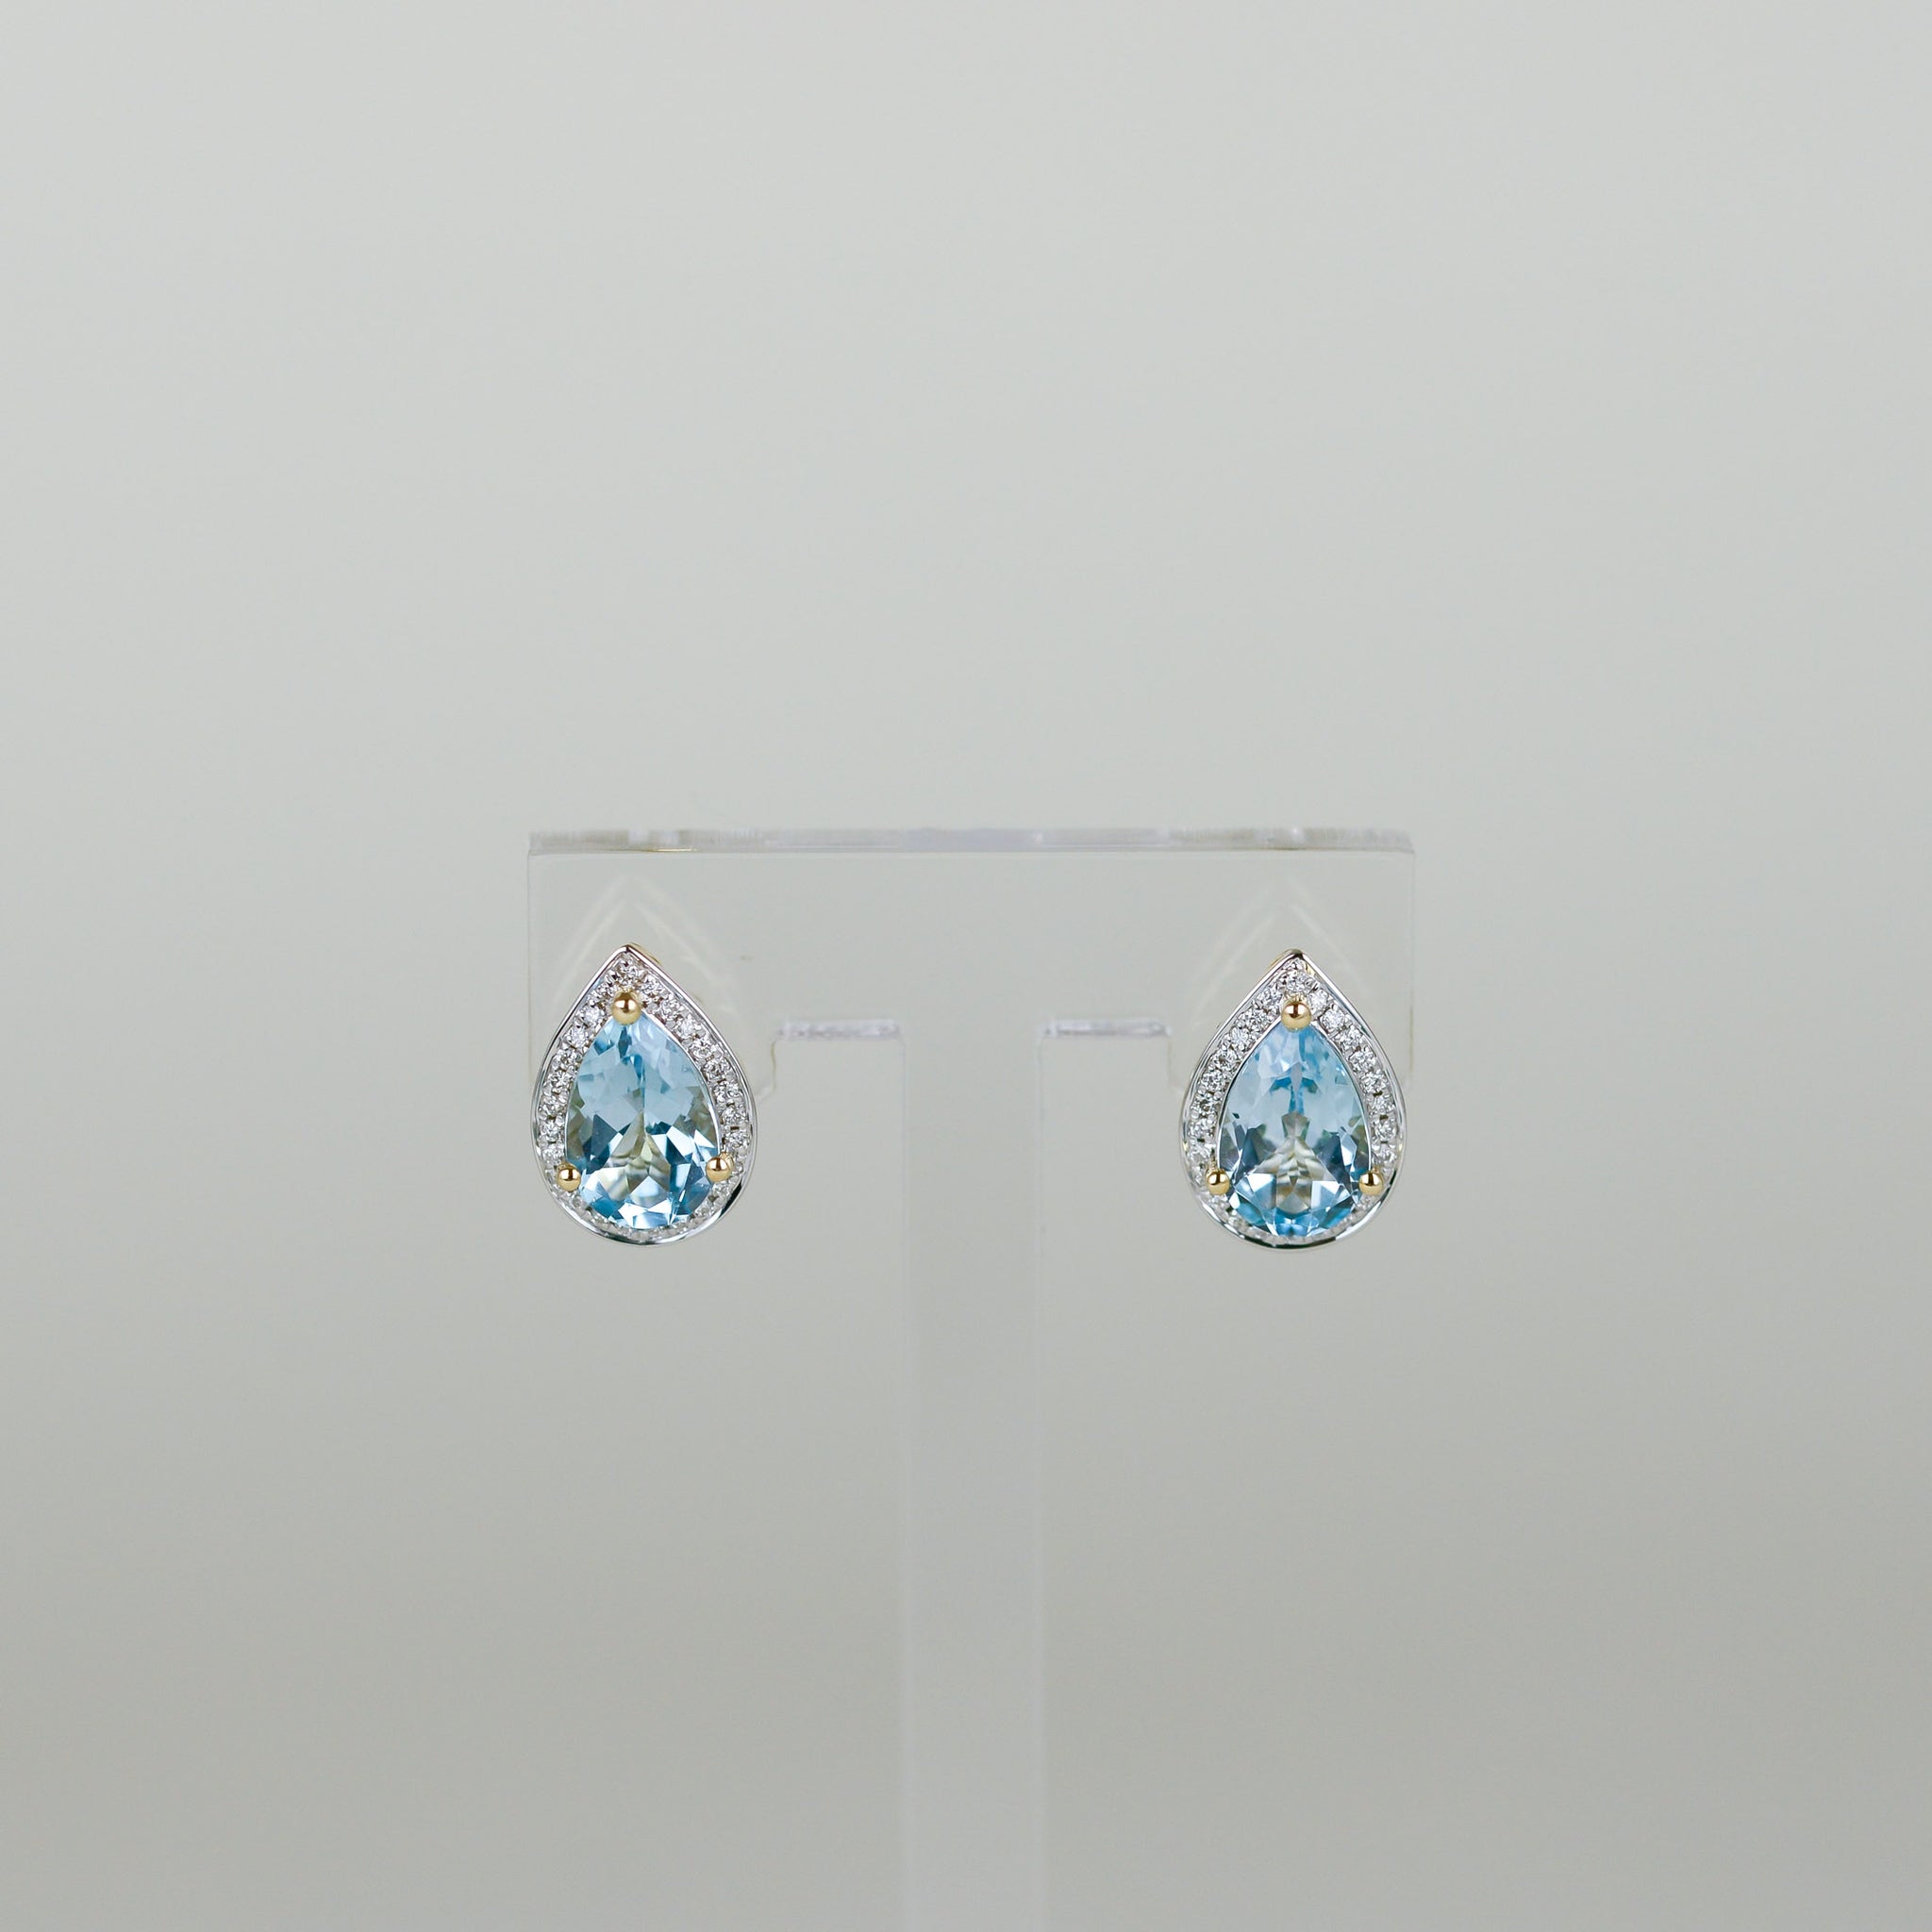 9ct Yellow Gold 2.96ct Blue Topaz and Diamond Stud Earrings